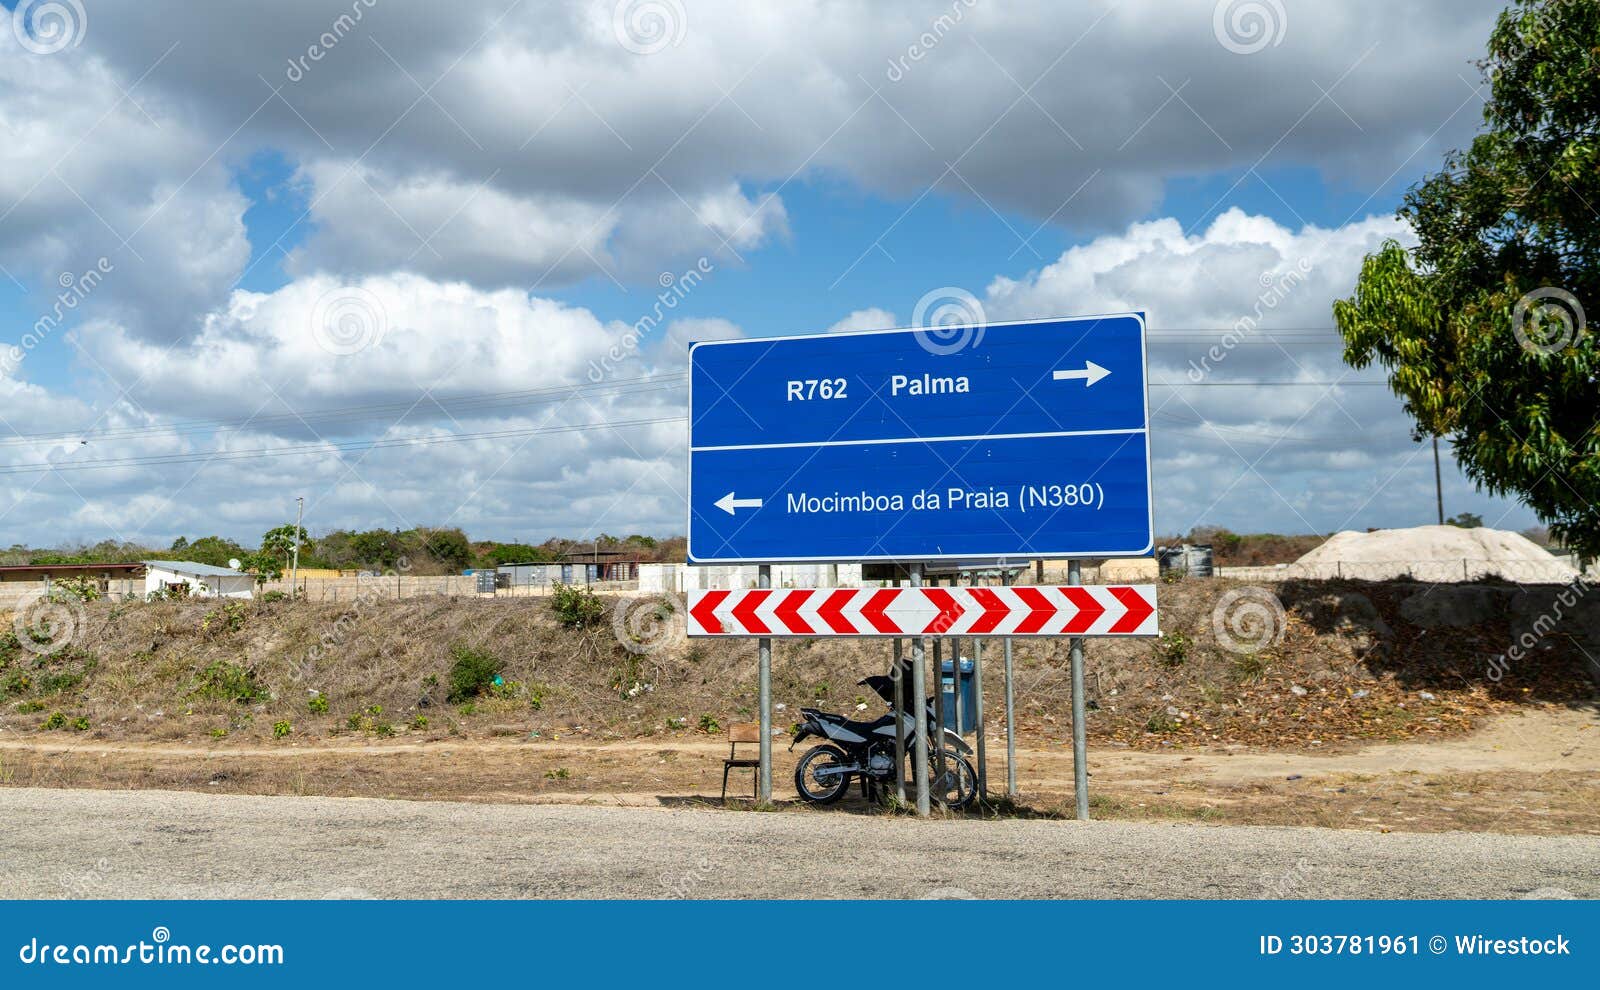 road sign in the towns of mocimboa da praia and palma in the cabo delgado province of mozambique